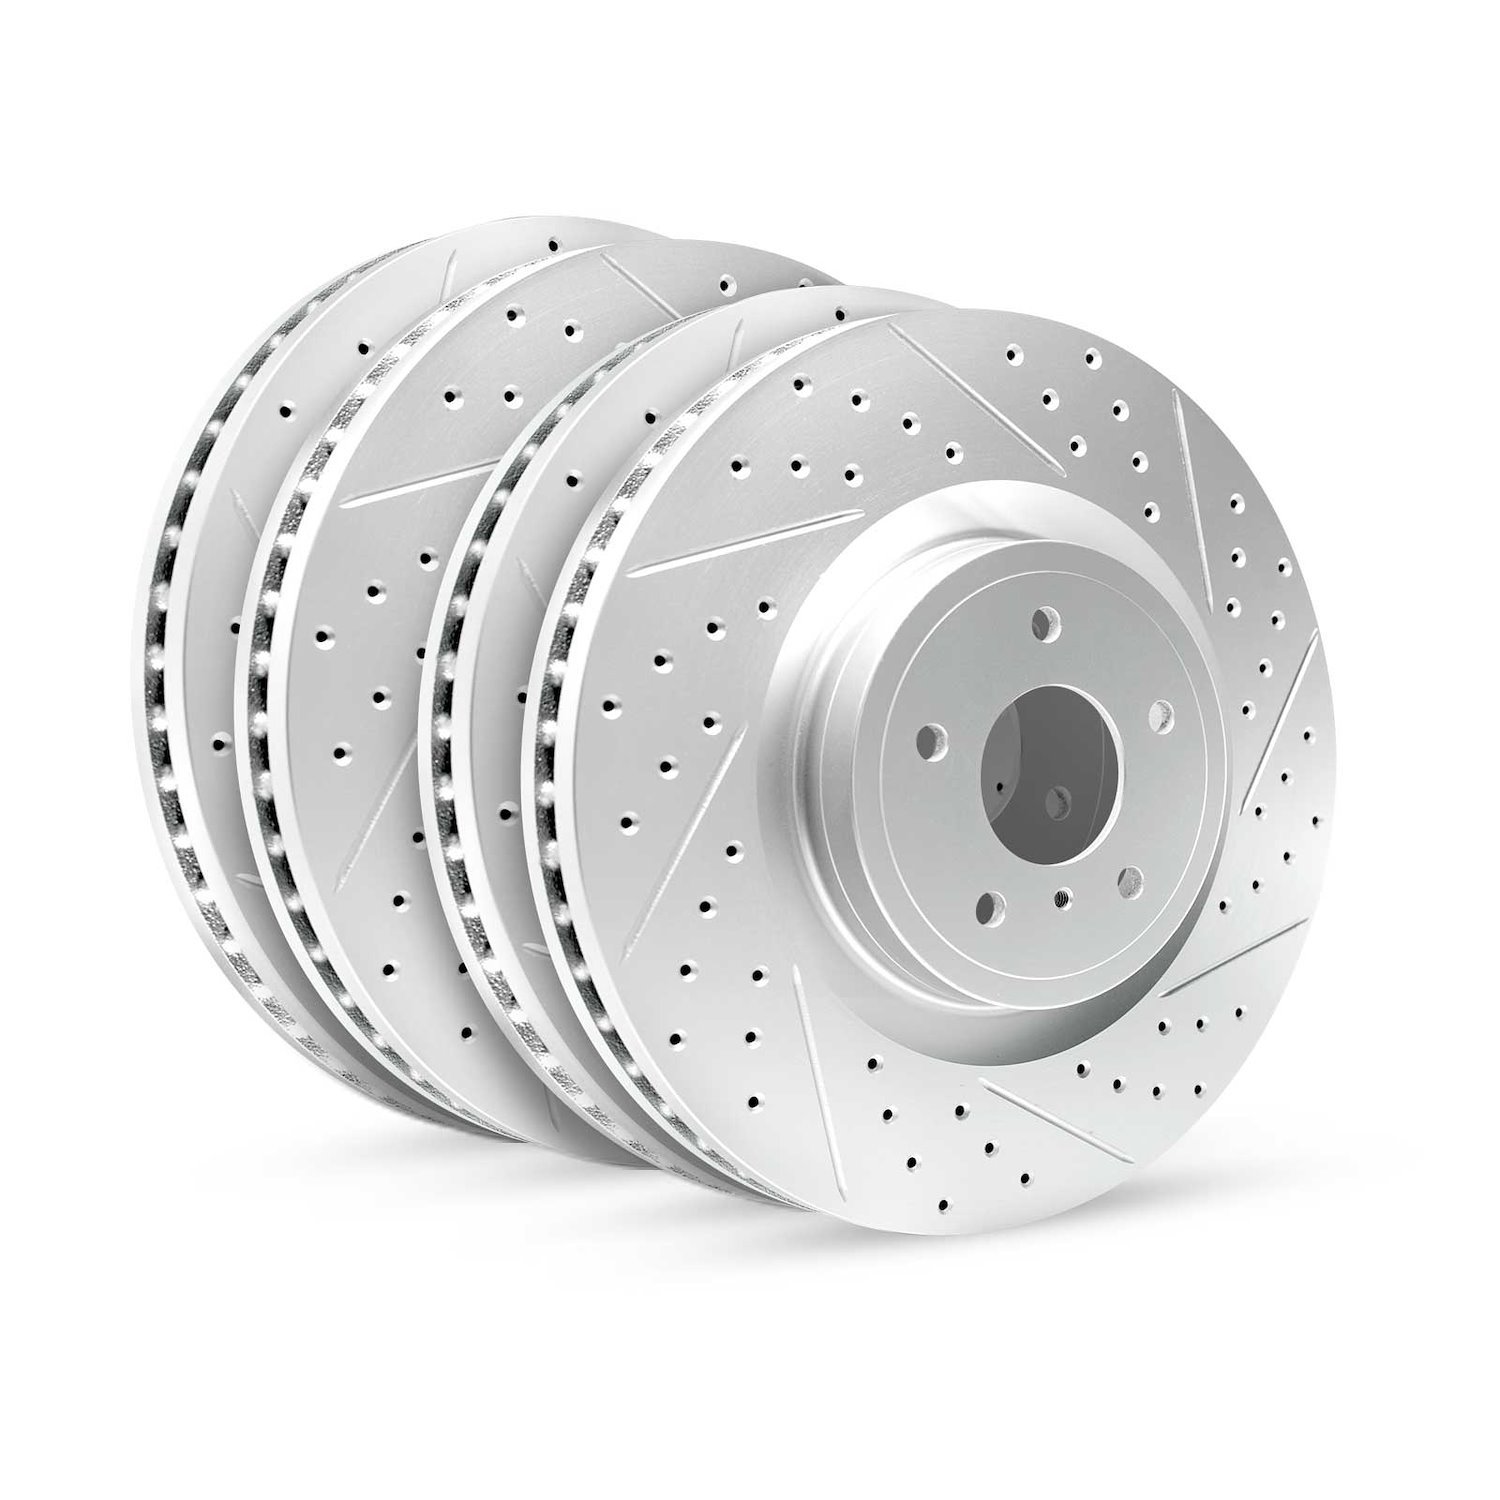 GEO-Carbon Drilled/Slotted Rotors, 2009-2013 Fits Multiple Makes/Models, Position: Front/Rear